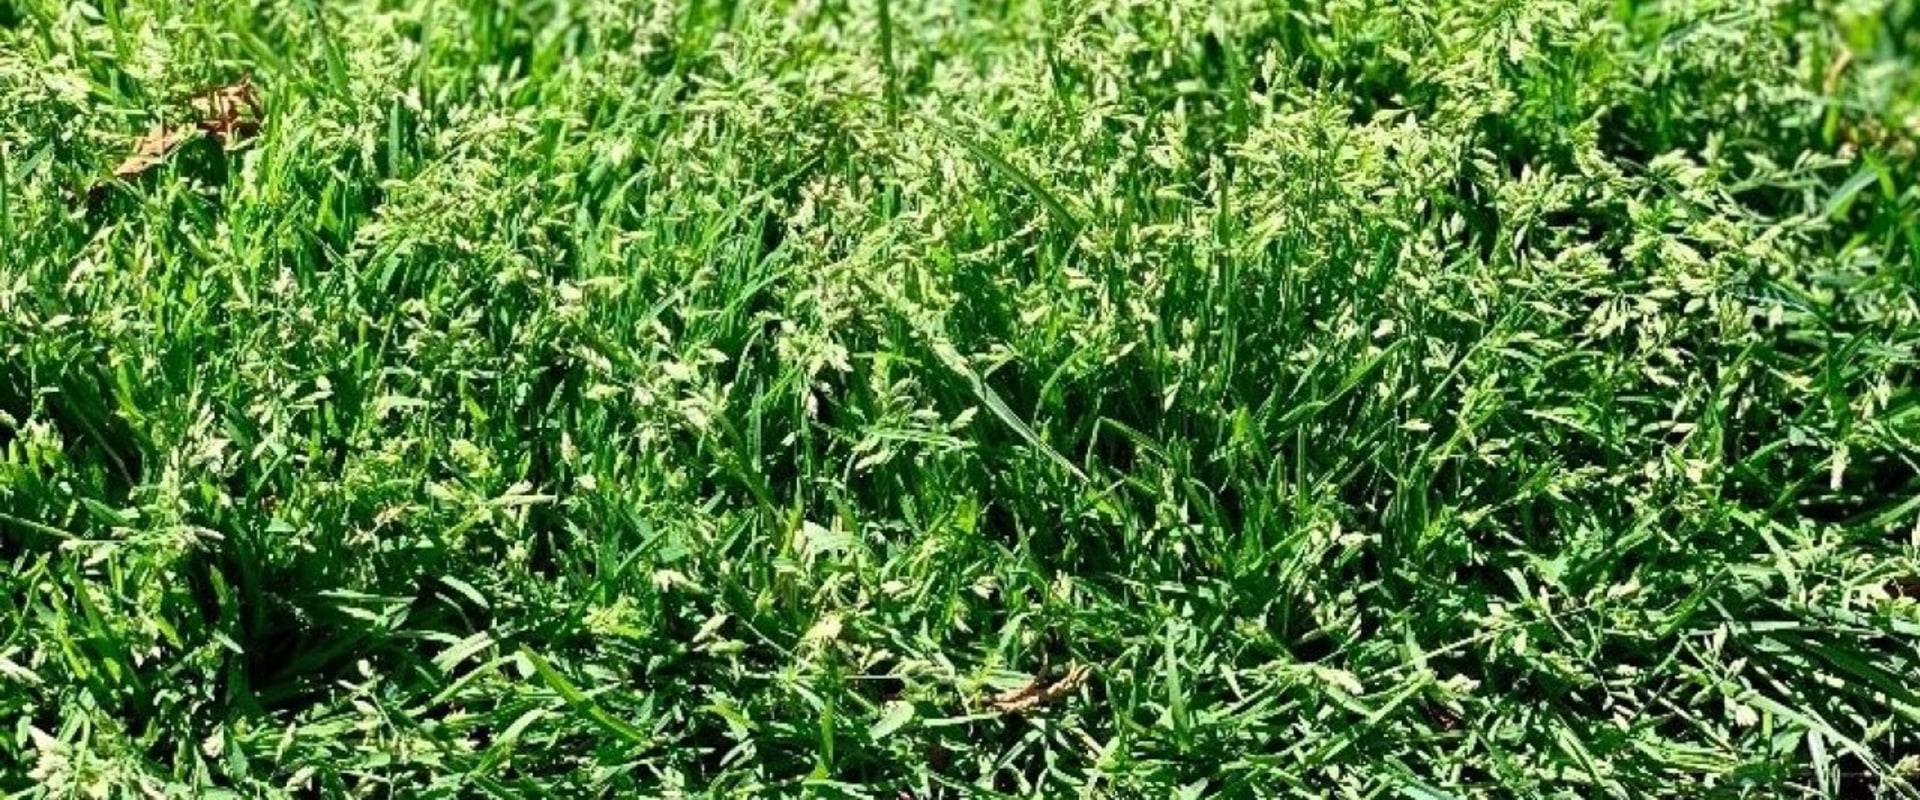 Are grass seed heads good?